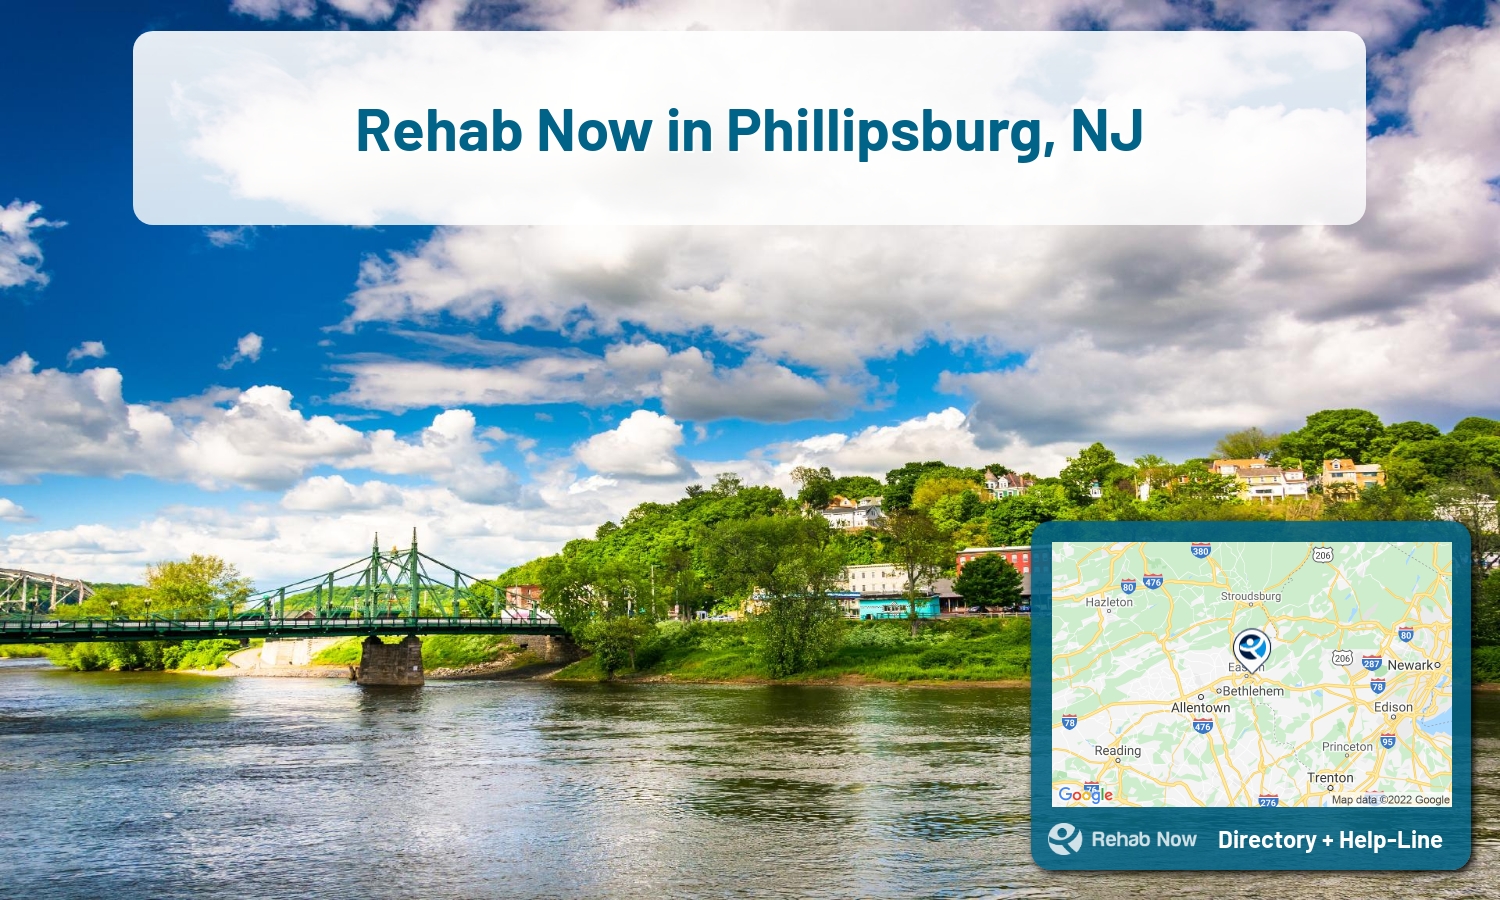 Phillipsburg, NJ Treatment Centers. Find drug rehab in Phillipsburg, New Jersey, or detox and treatment programs. Get the right help now!